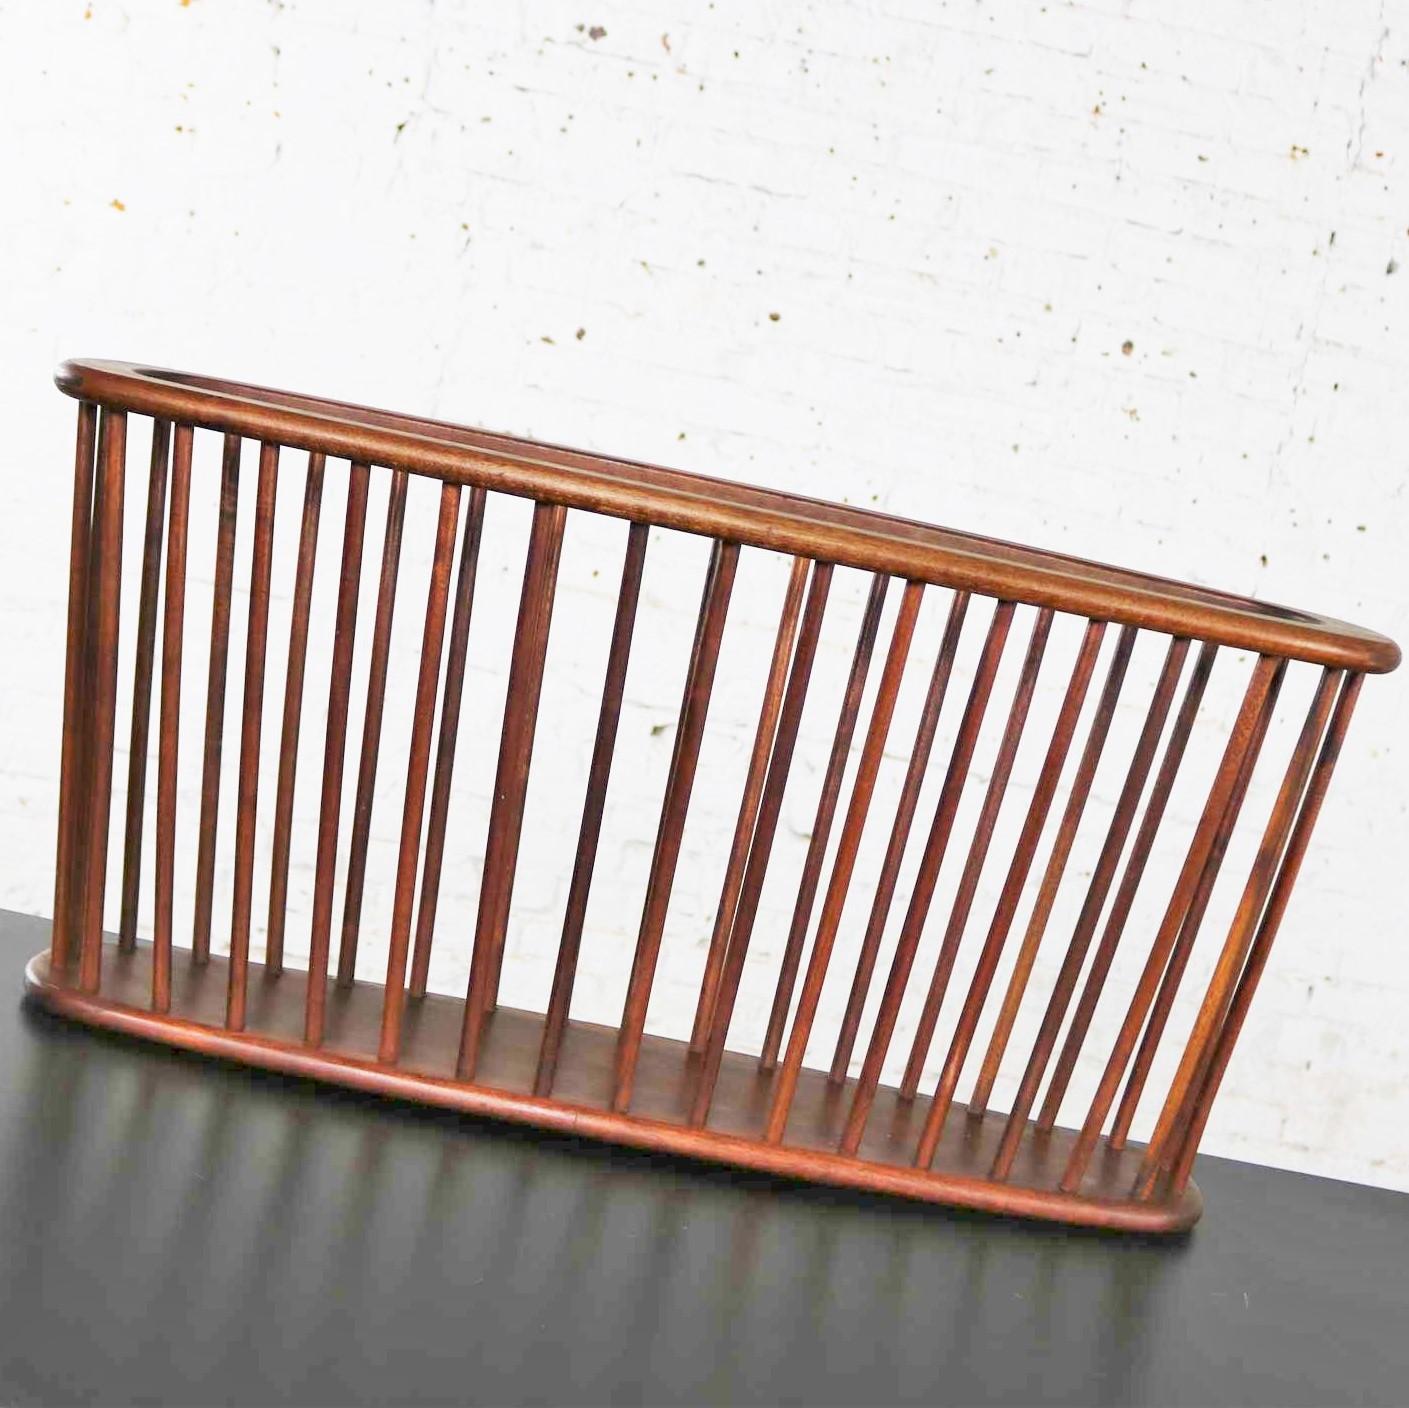 Handsome walnut oval magazine rack in the larger size attributed to Arthur Umanoff for Washington Woodcraft. It is in fabulous original condition which we have just given a good cleaning and oiling. Please see photos, circa 1960s.

If you need a